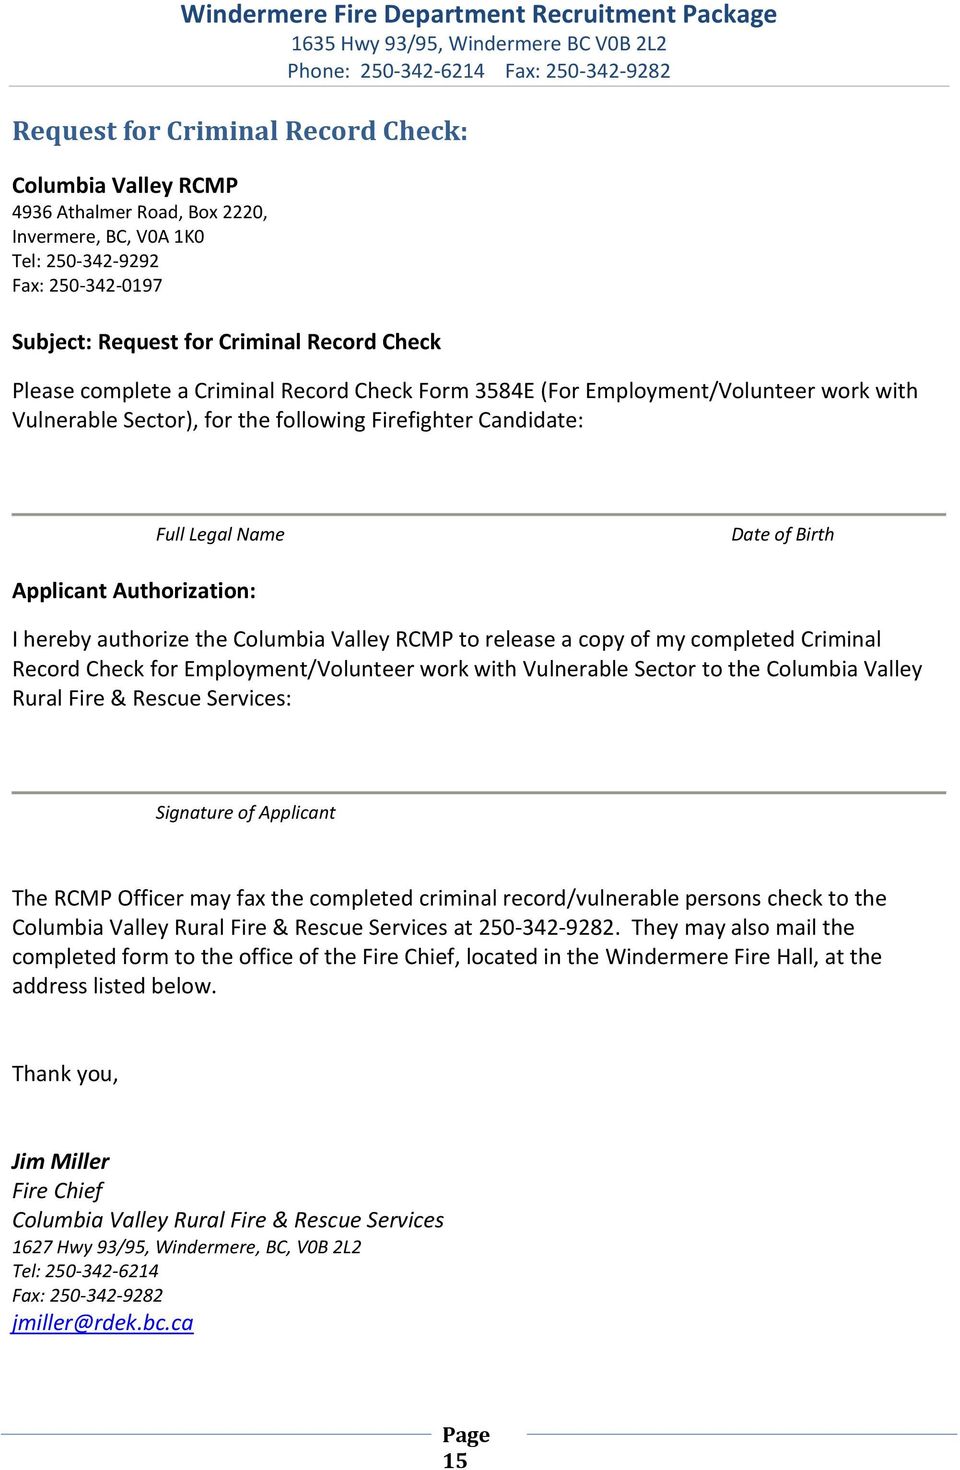 hereby authorize the Columbia Valley RCMP to release a copy of my completed Criminal Record Check for Employment/Volunteer work with Vulnerable Sector to the Columbia Valley Rural Fire & Rescue